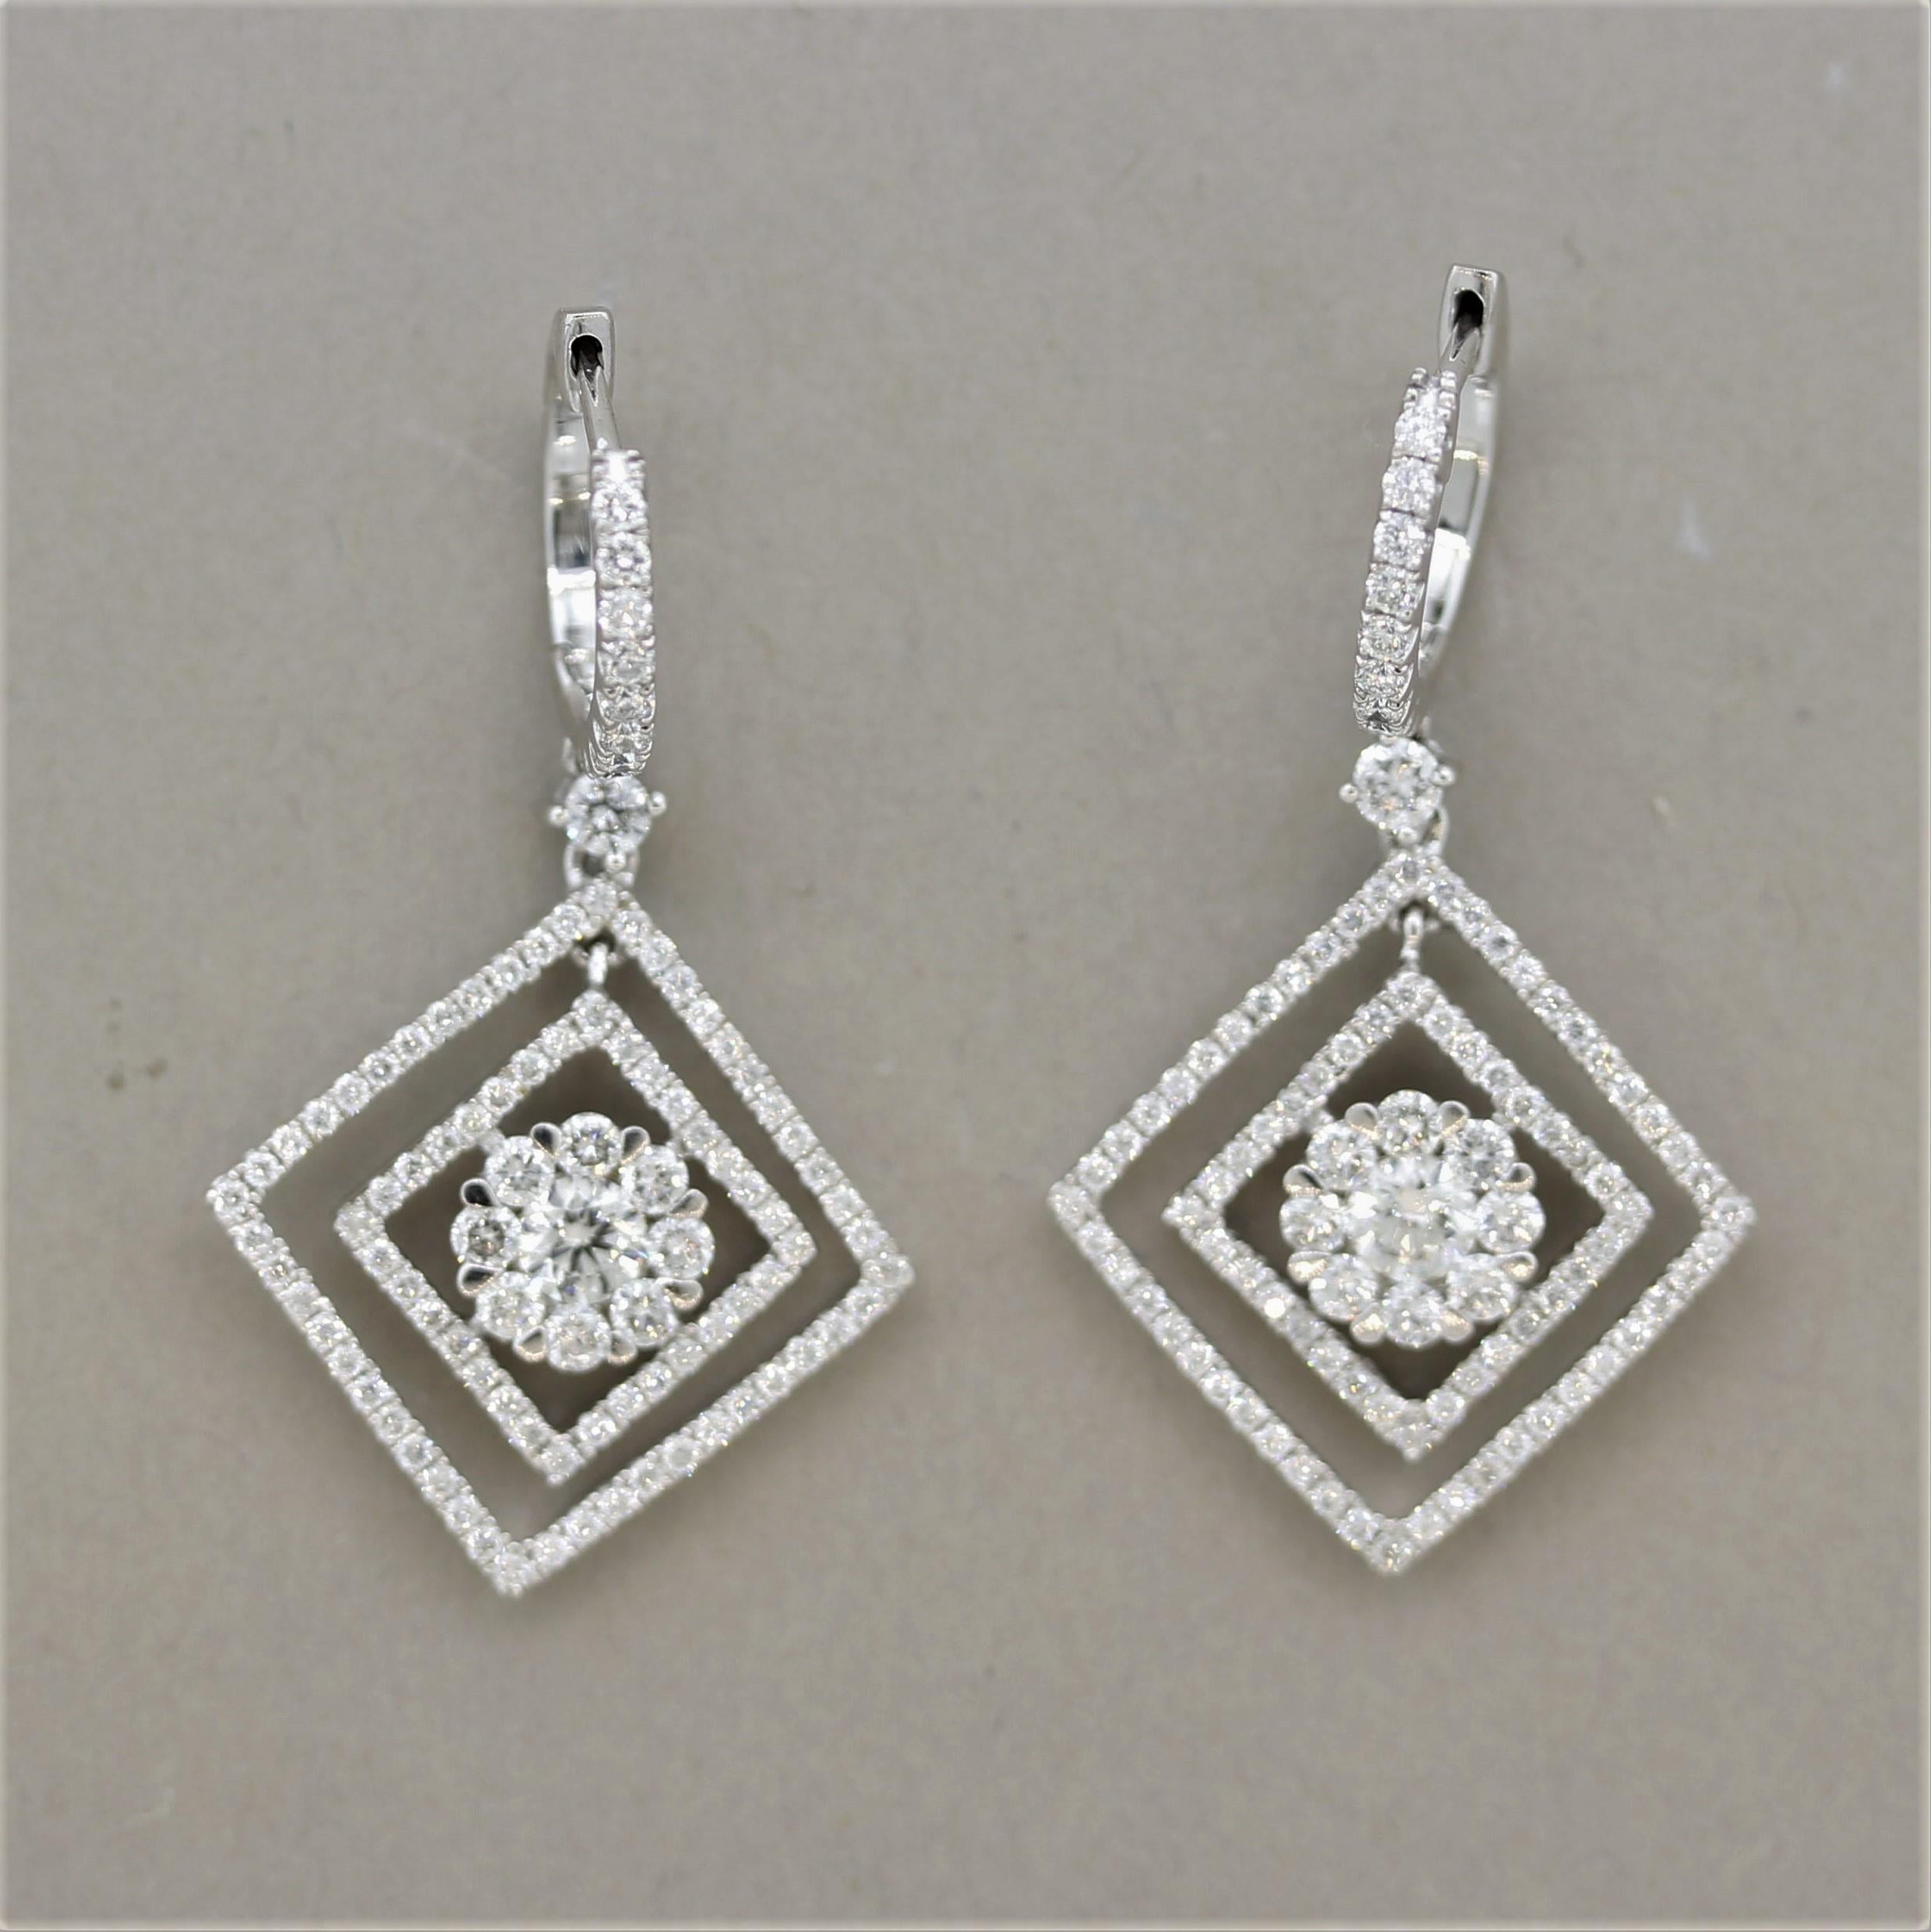 A chic and stylish pair of diamond earrings with great movement. They feature 2.00 carats of fine round brilliant-cut diamonds set around the earrings. The center of the earrings have a larger round diamond haloed by smaller round-cuts giving it a